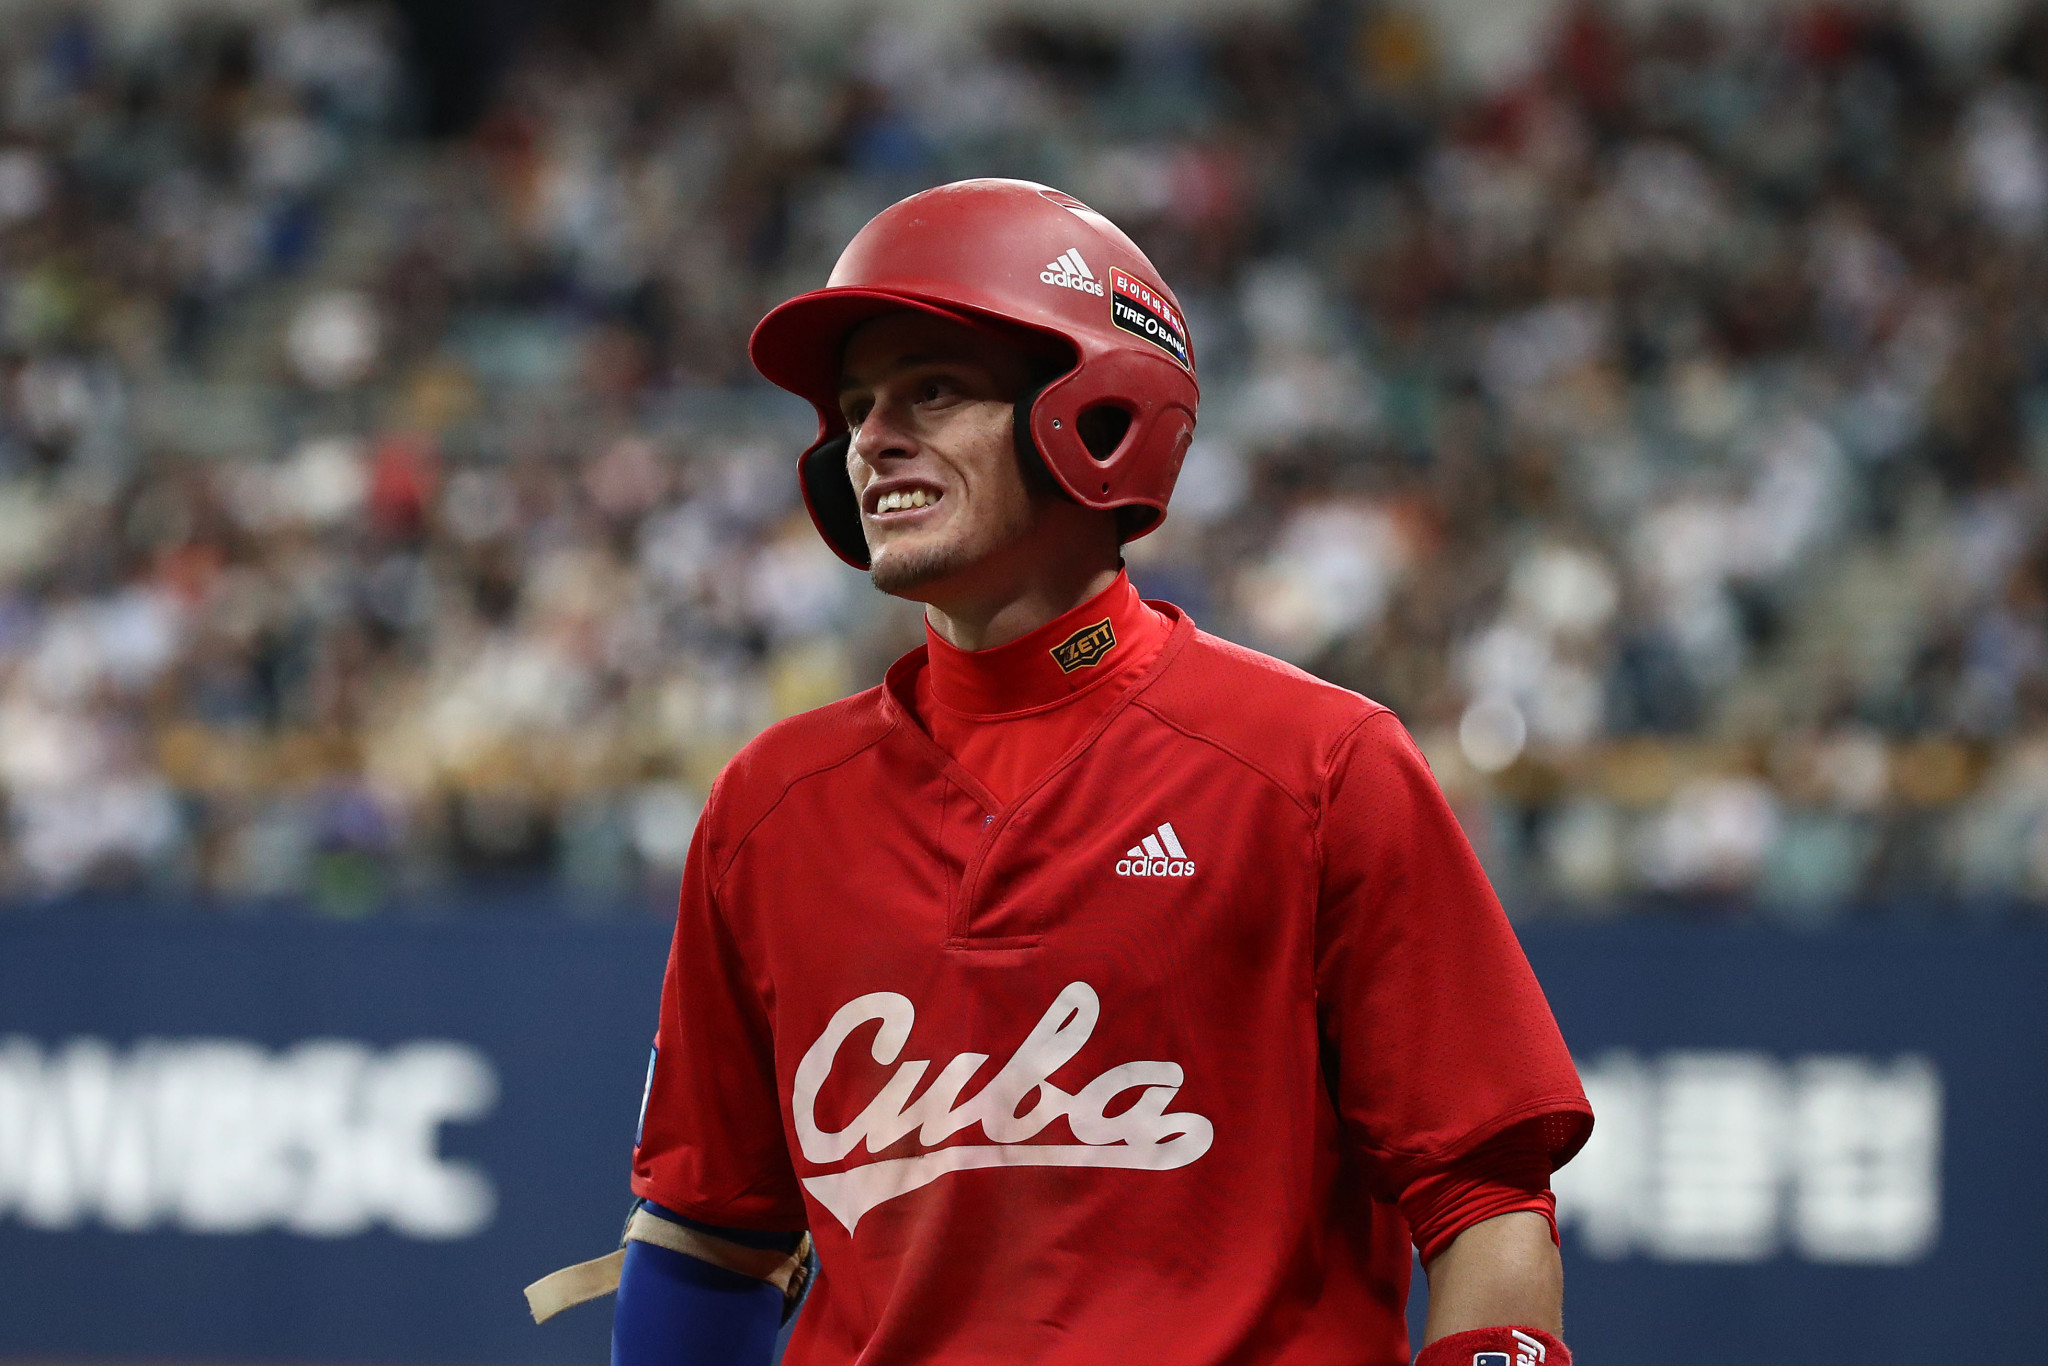 Cuba are heading into the final undefeated ©Getty Images